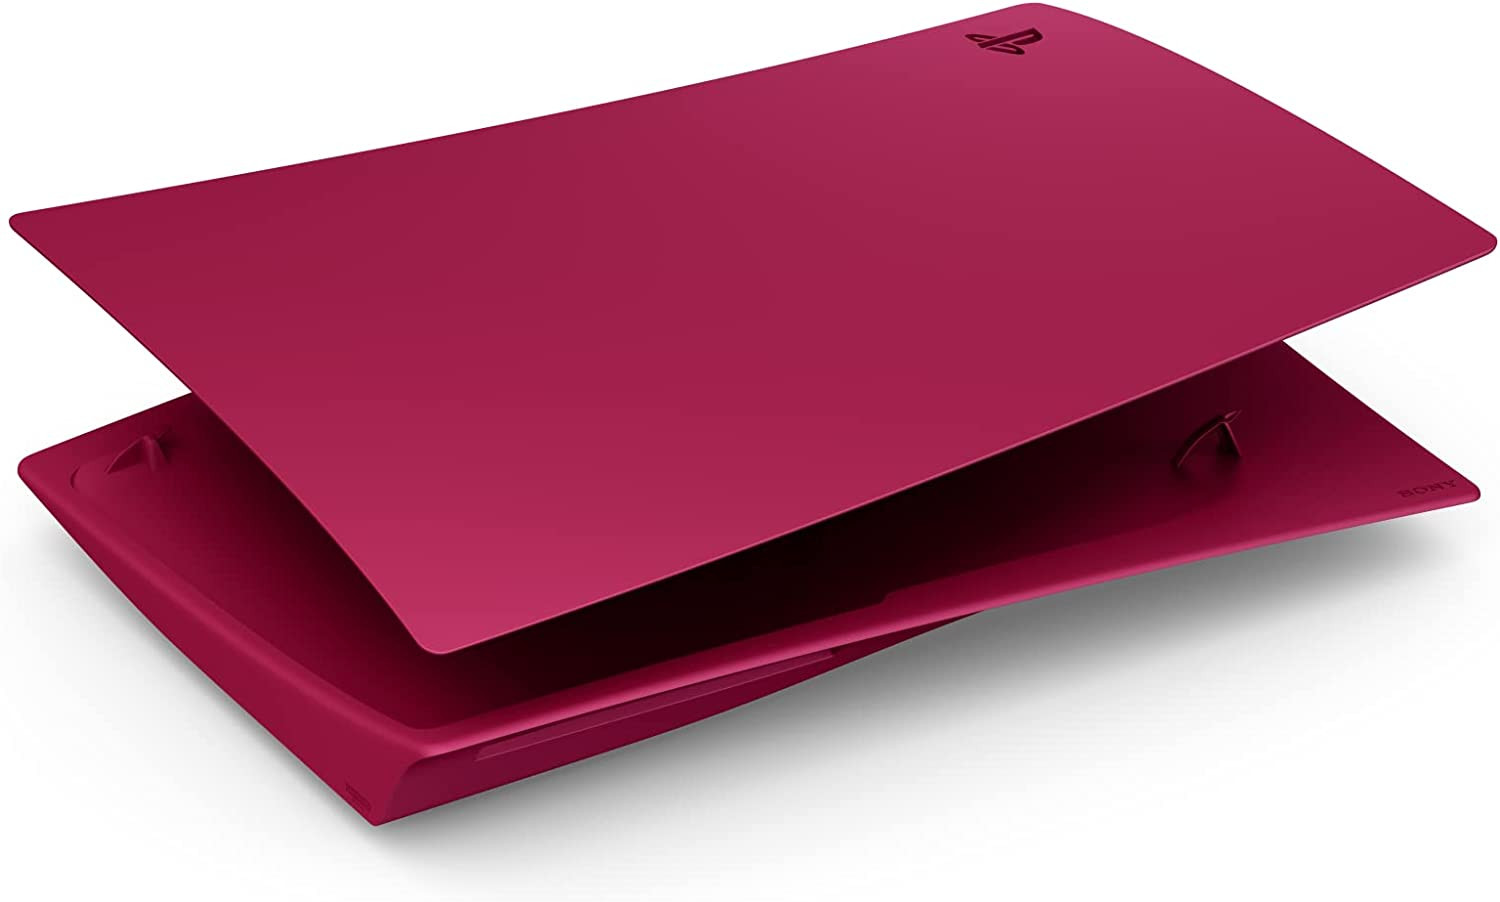 Sony PS5 Cover - Cosmic Red - PS5 Console